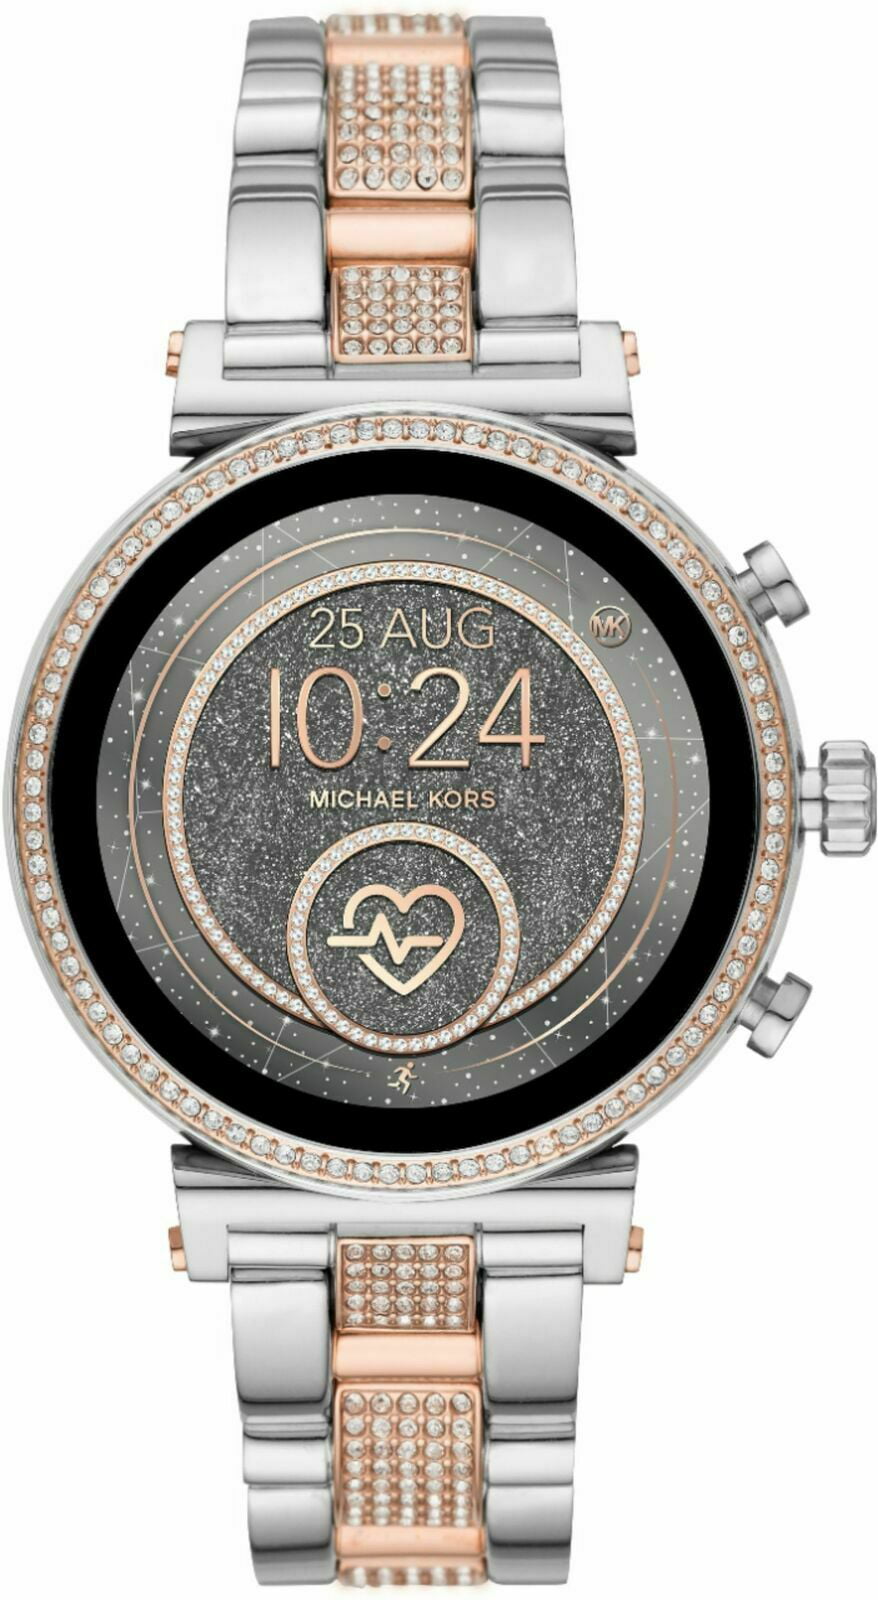 Michael Kors Access Gen 4 Sofie Rose Goldtone and Embossed Silicone  Smartwatch  VINAQUICK